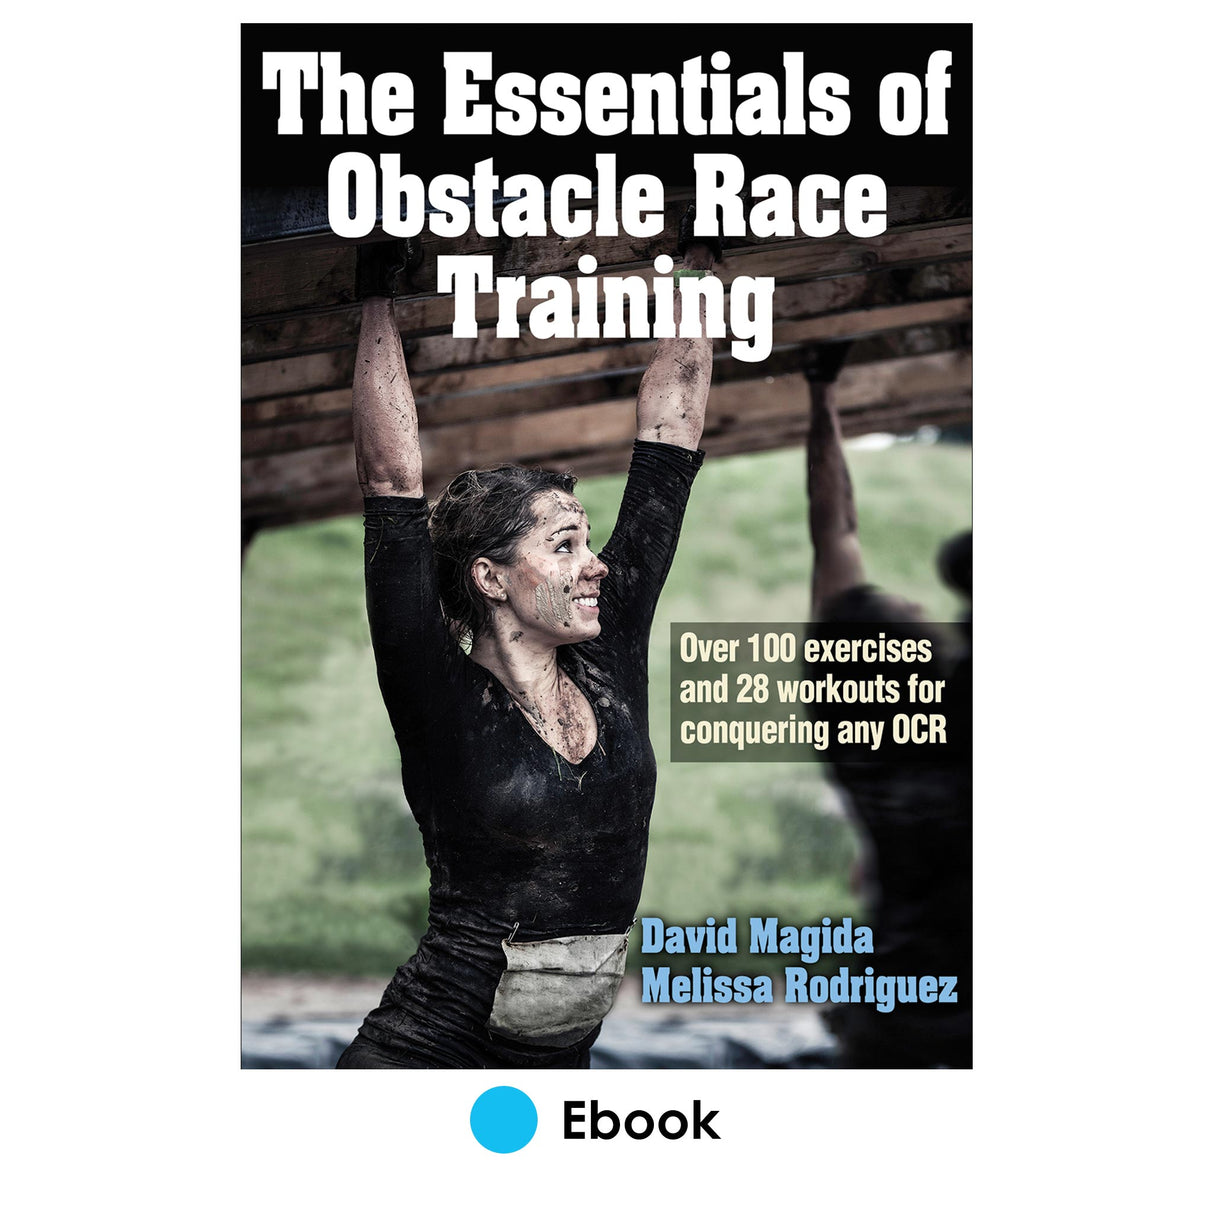 Essentials of Obstacle Race Training PDF, The